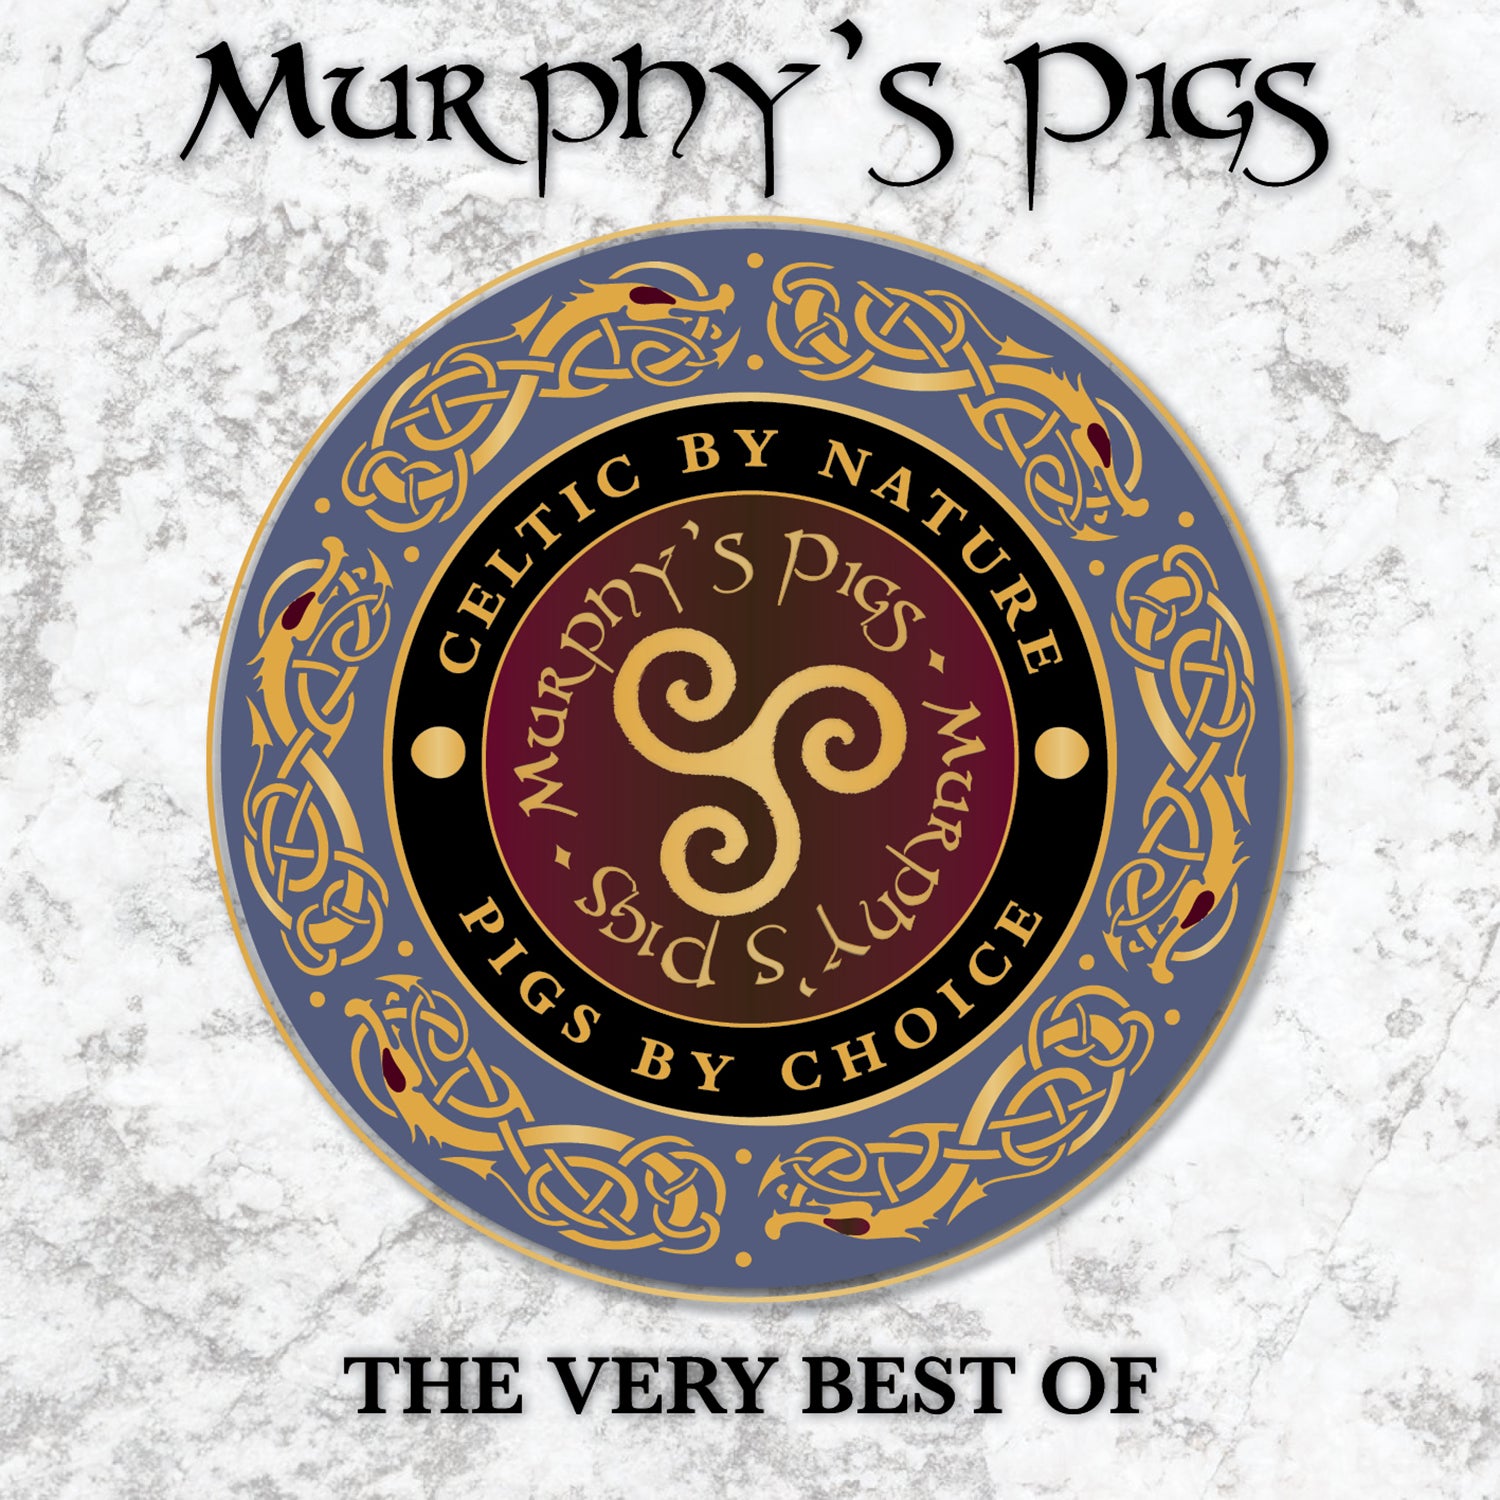 MURPHY'S PIGS - THE VERY BEST OF